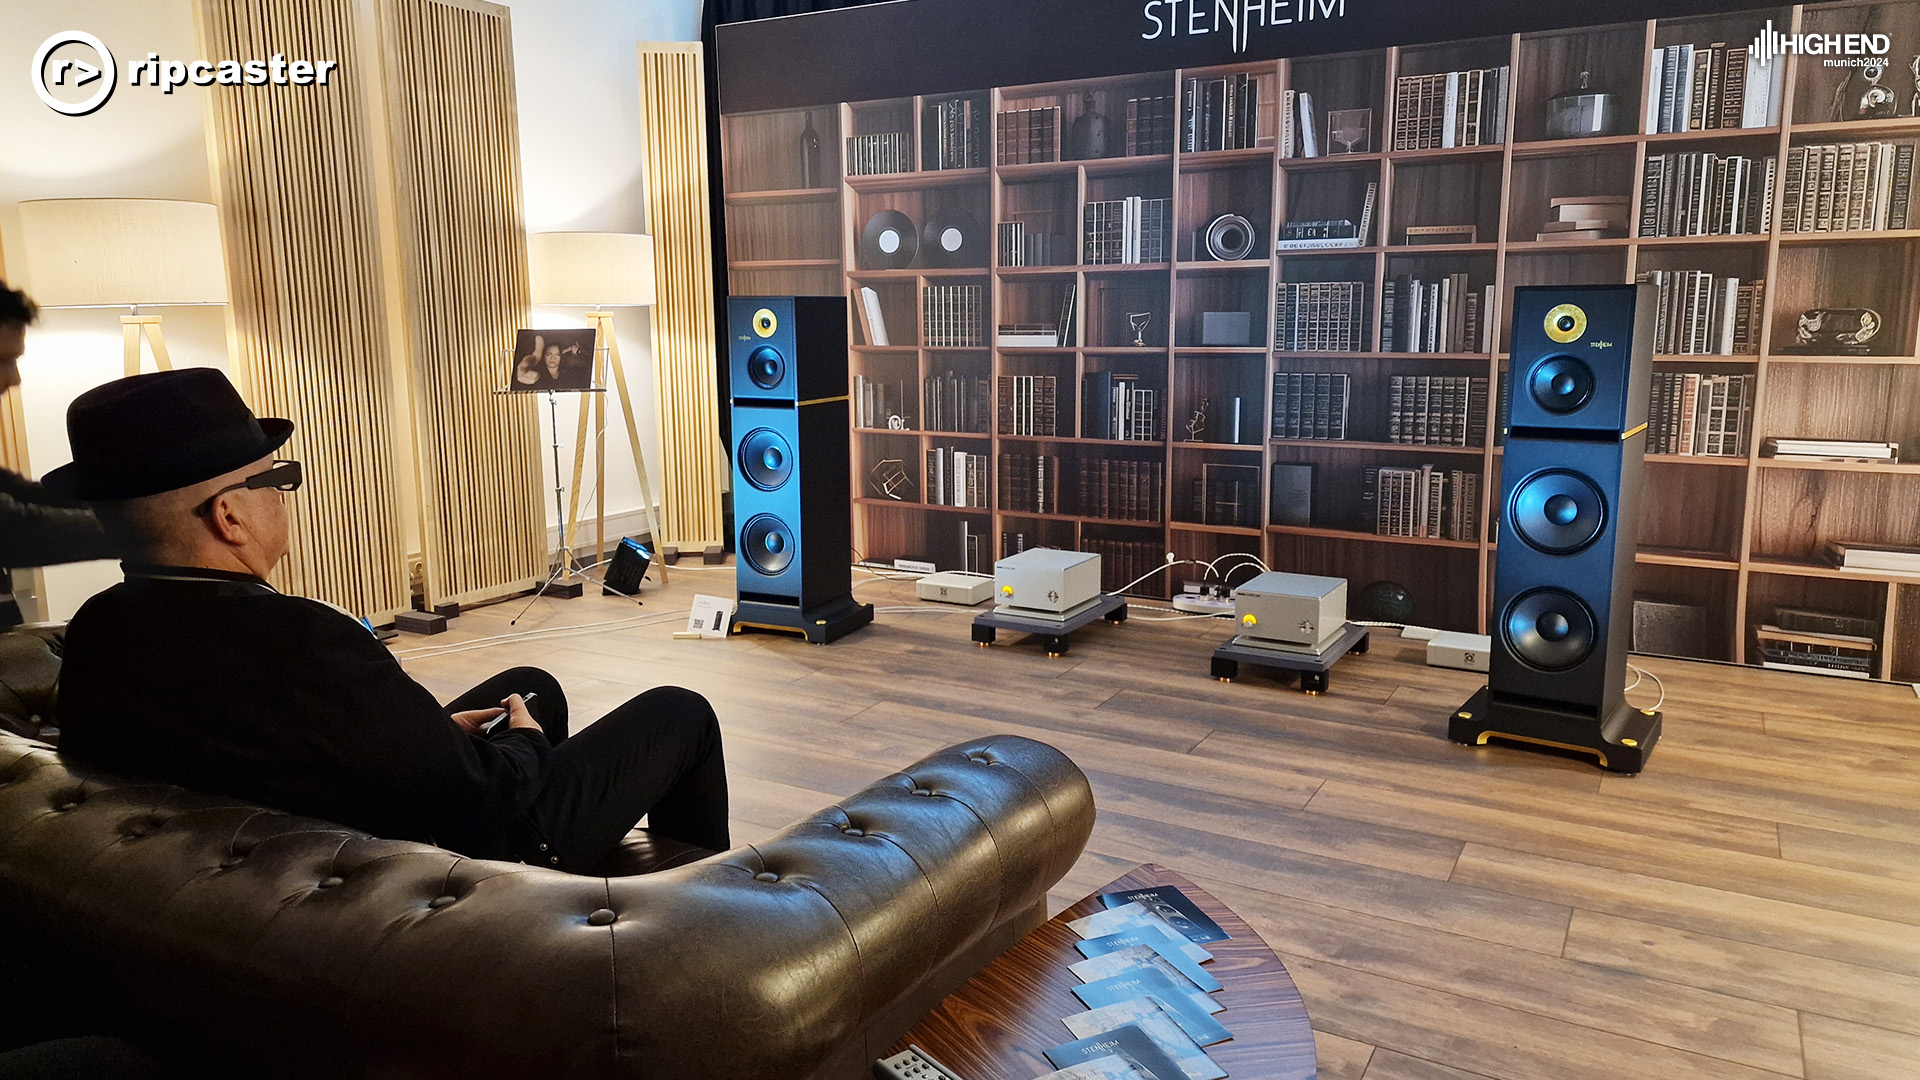 A man in the foreground sitting down and a pair of floorstanding speakers in front of him either side of two low HiFi boxes